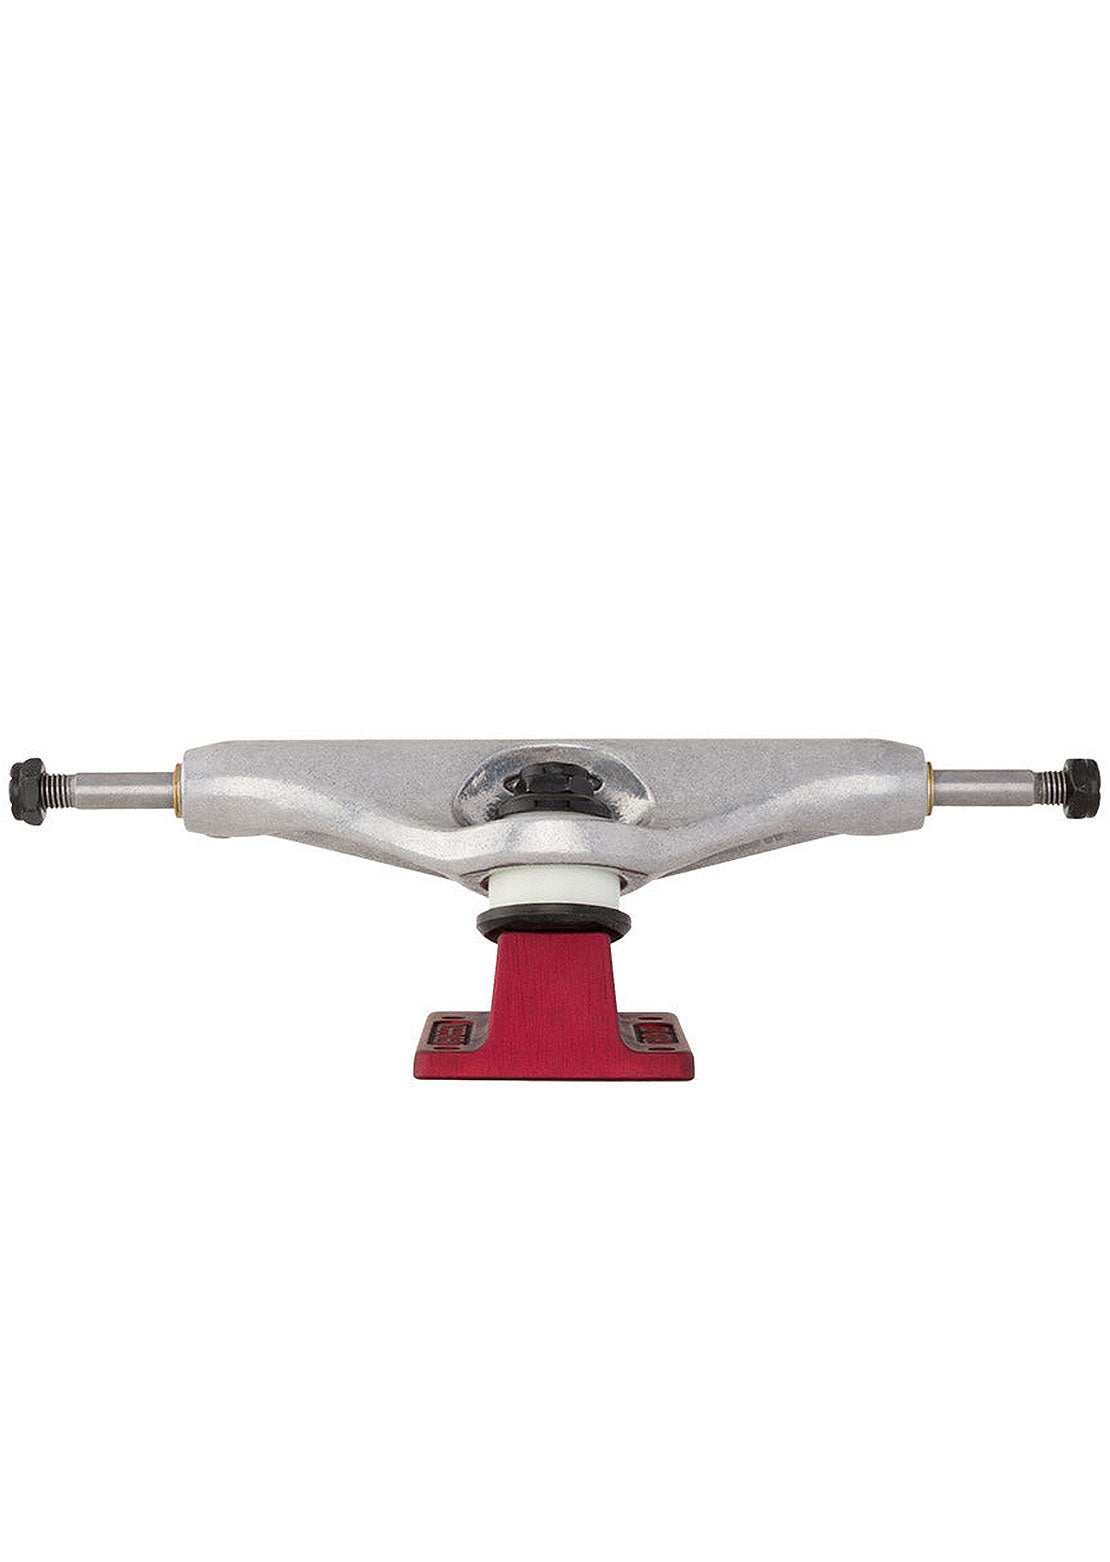 Independent Stage 11 Hollow Delfino Skateboard Trucks 2-Pack Silver/Red